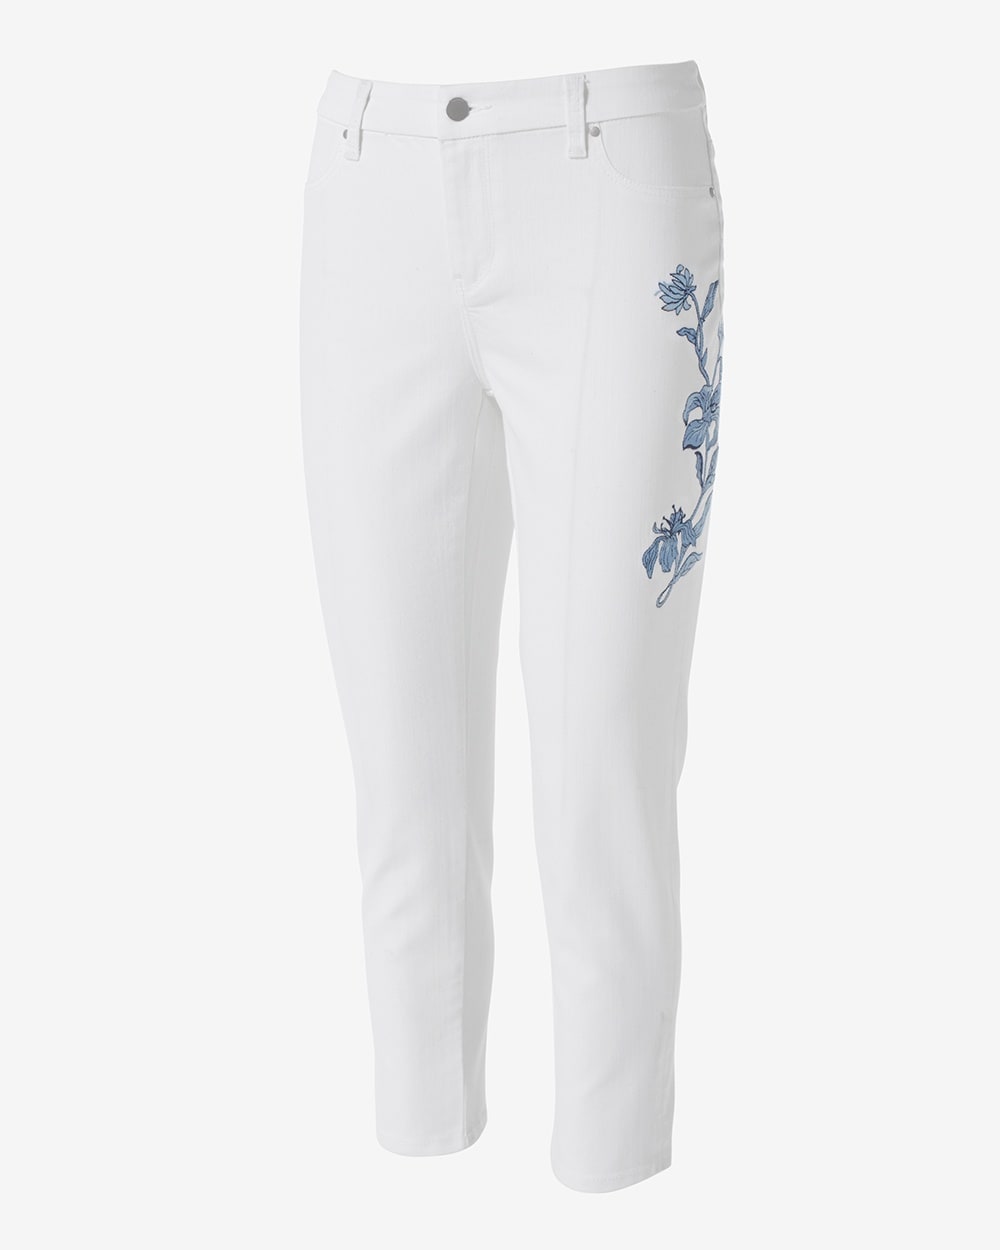 Blue Floral Embroidery Girlfriend Ankle Jeans